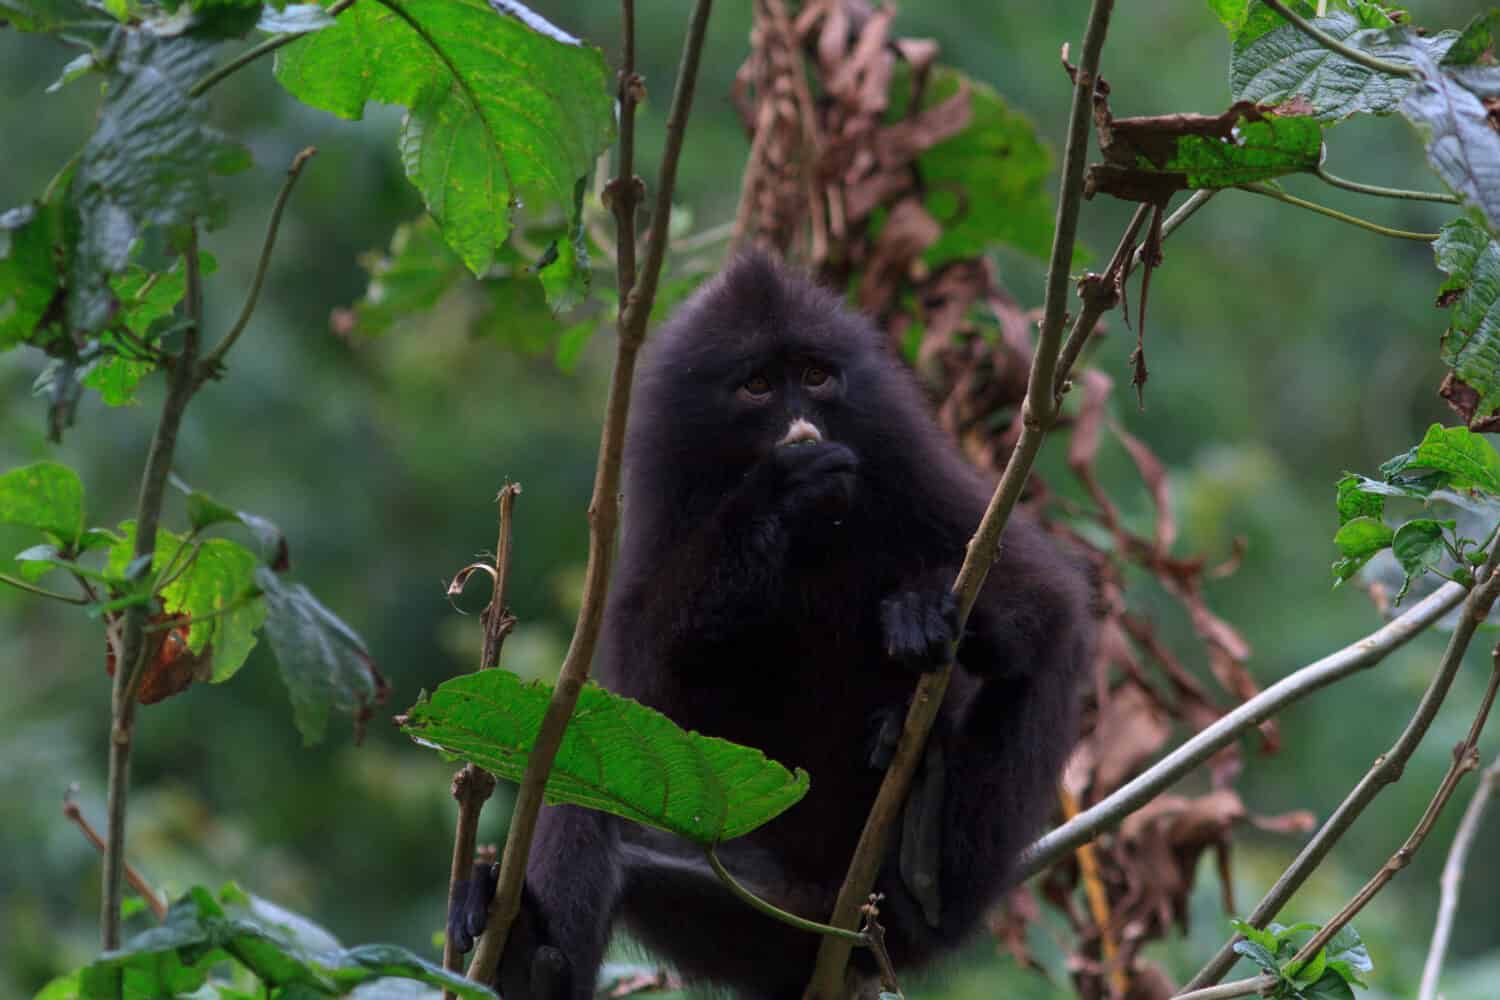 The banded surili, also known as the banded langur or the banded leaf monkey, once roamed the tropical jungles from the southern peninsulas of Myanmar and Thailand